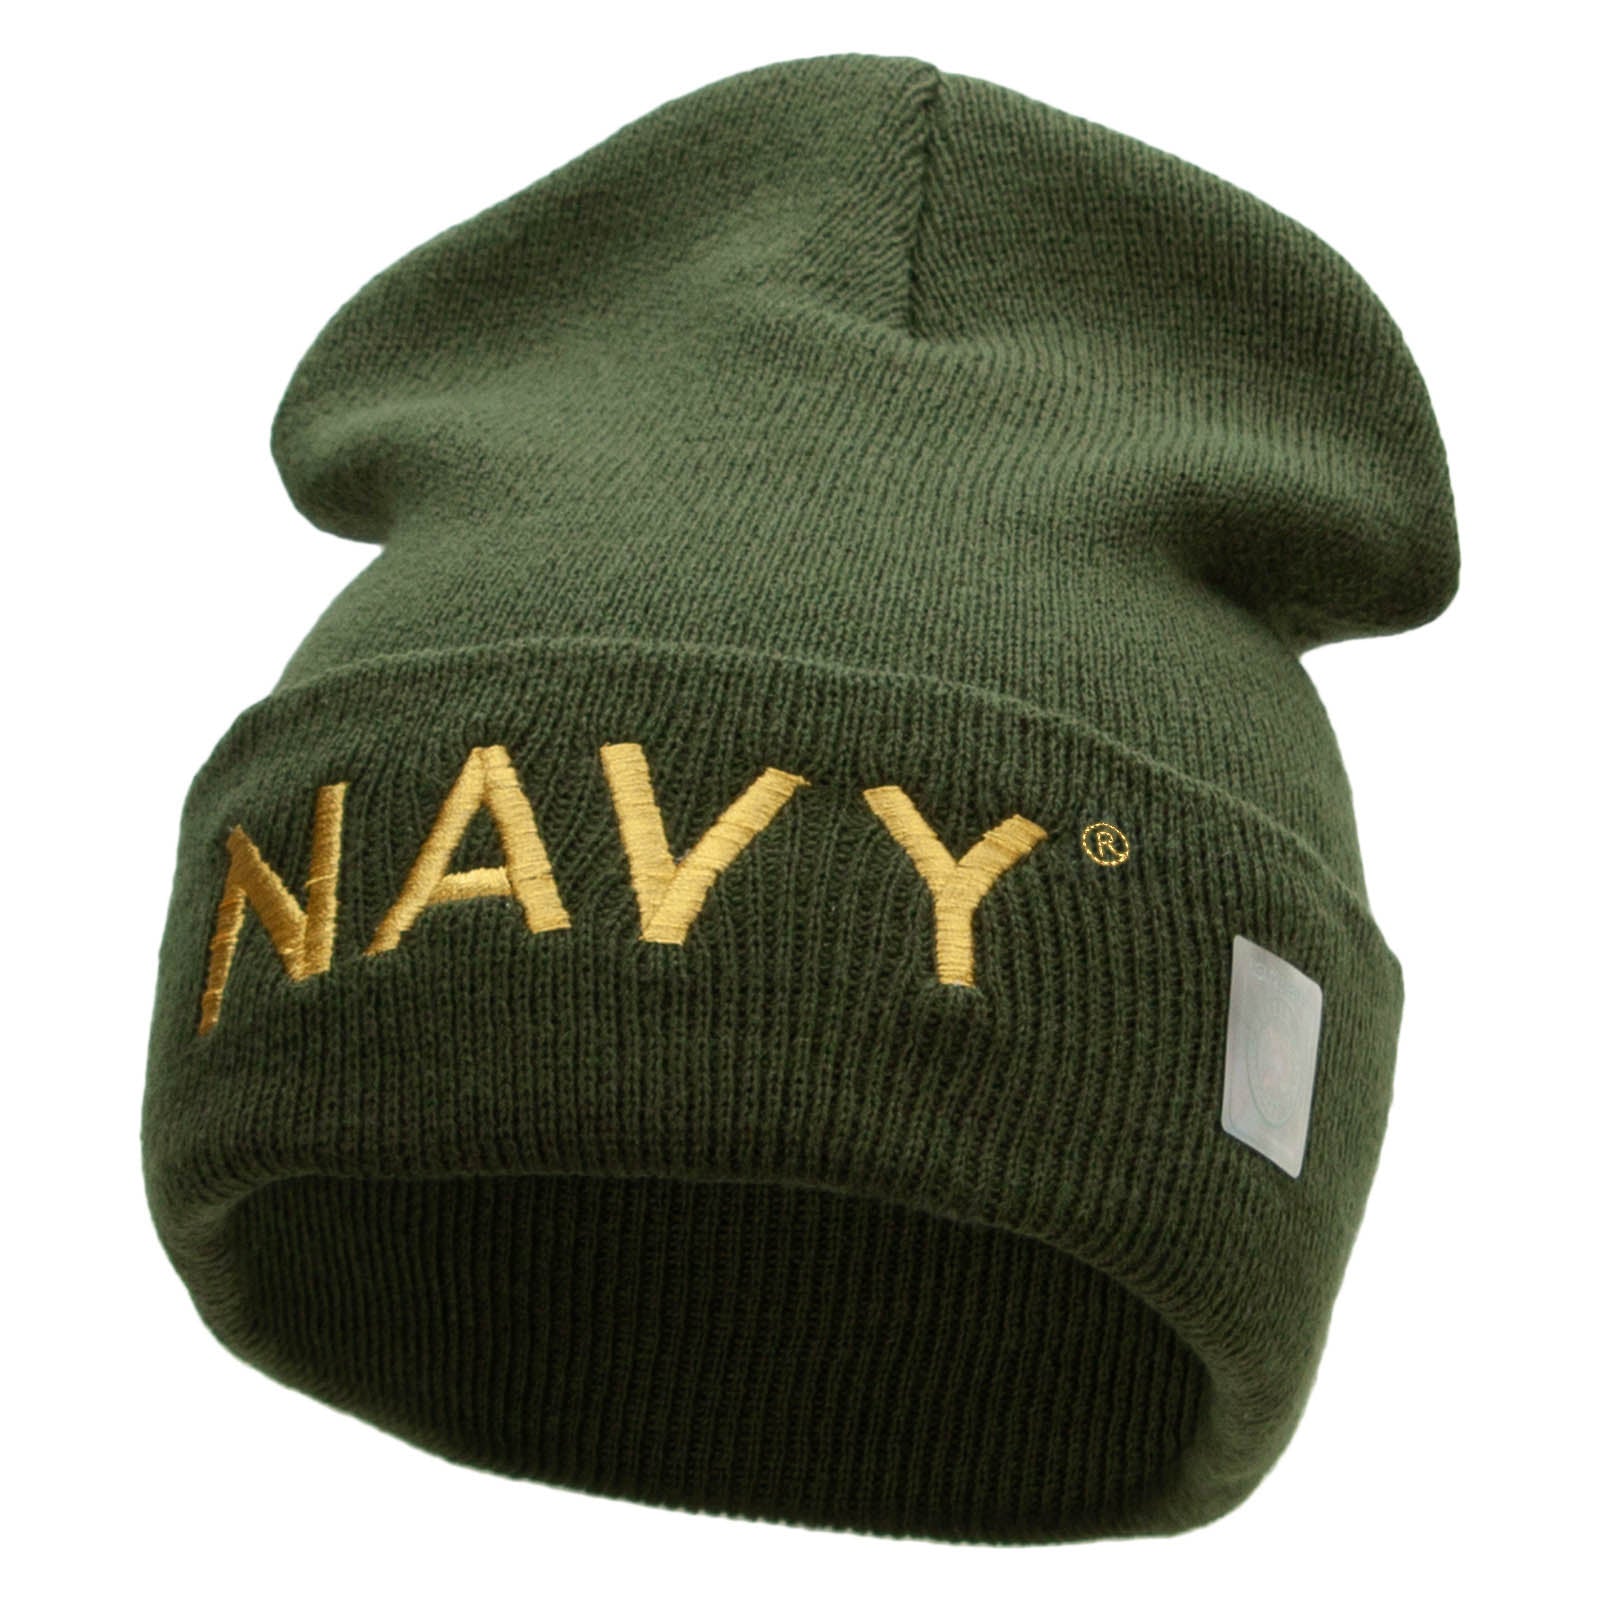 Licensed Navy Embroidered Long Knitted Beanie Made in USA - Olive OSFM